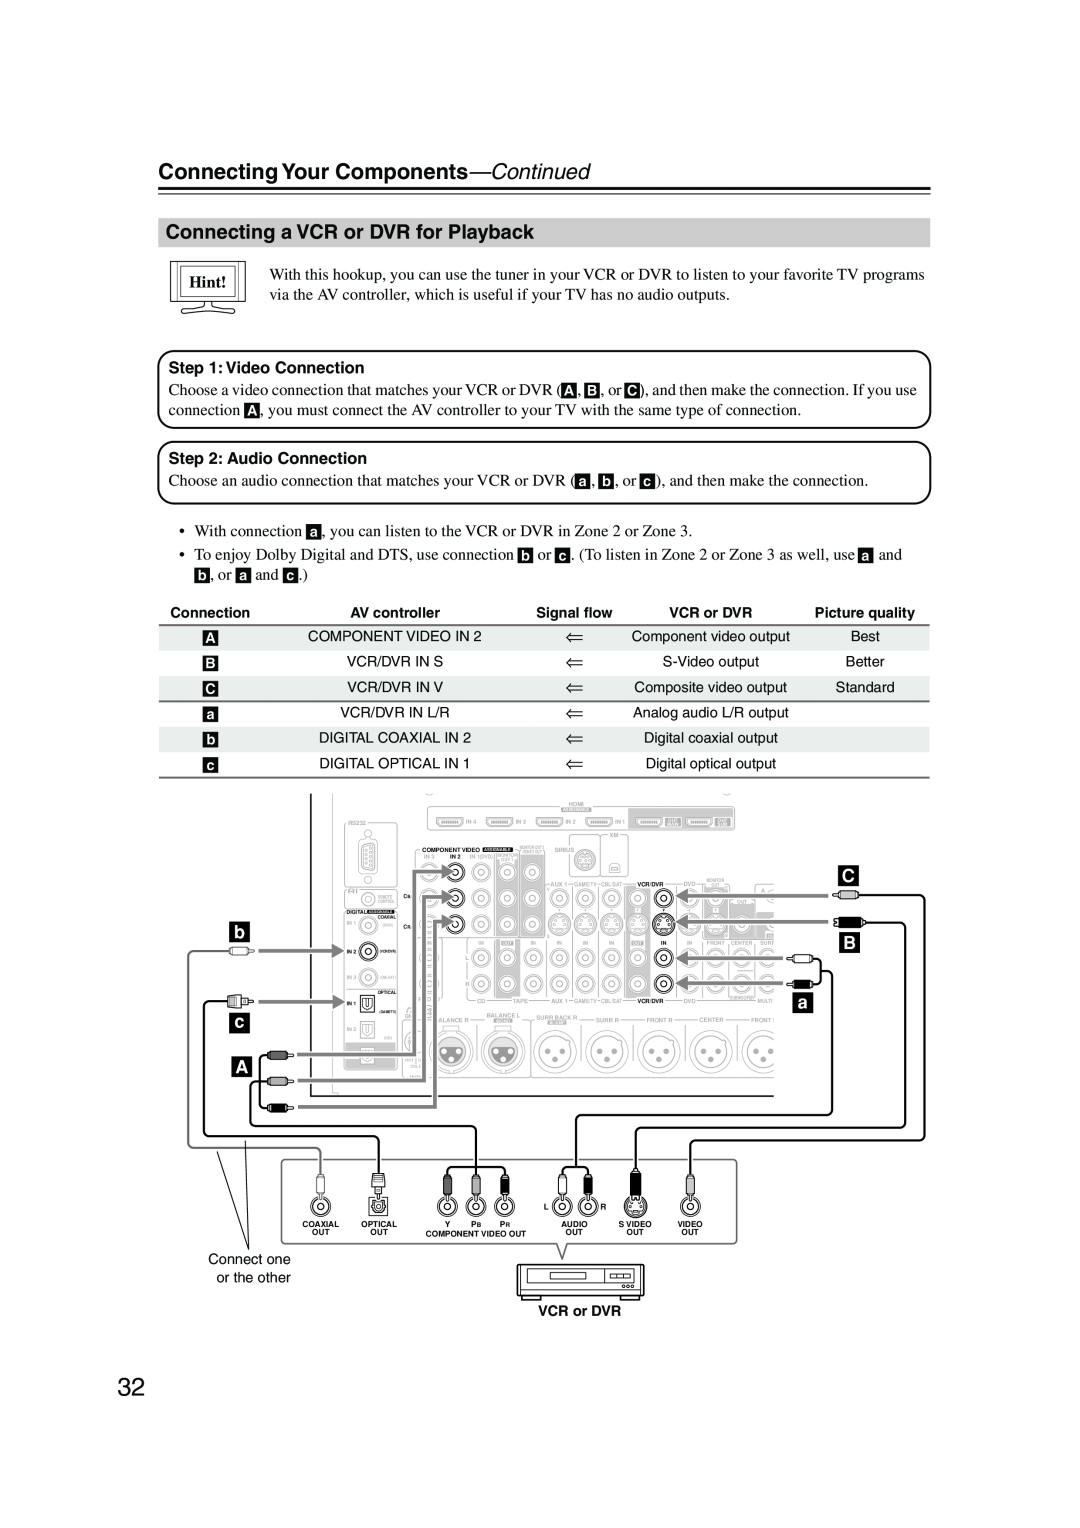 Onkyo PR-SC885 instruction manual Connecting a VCR or DVR for Playback, Connecting Your Components—Continued, b c A, Hint 